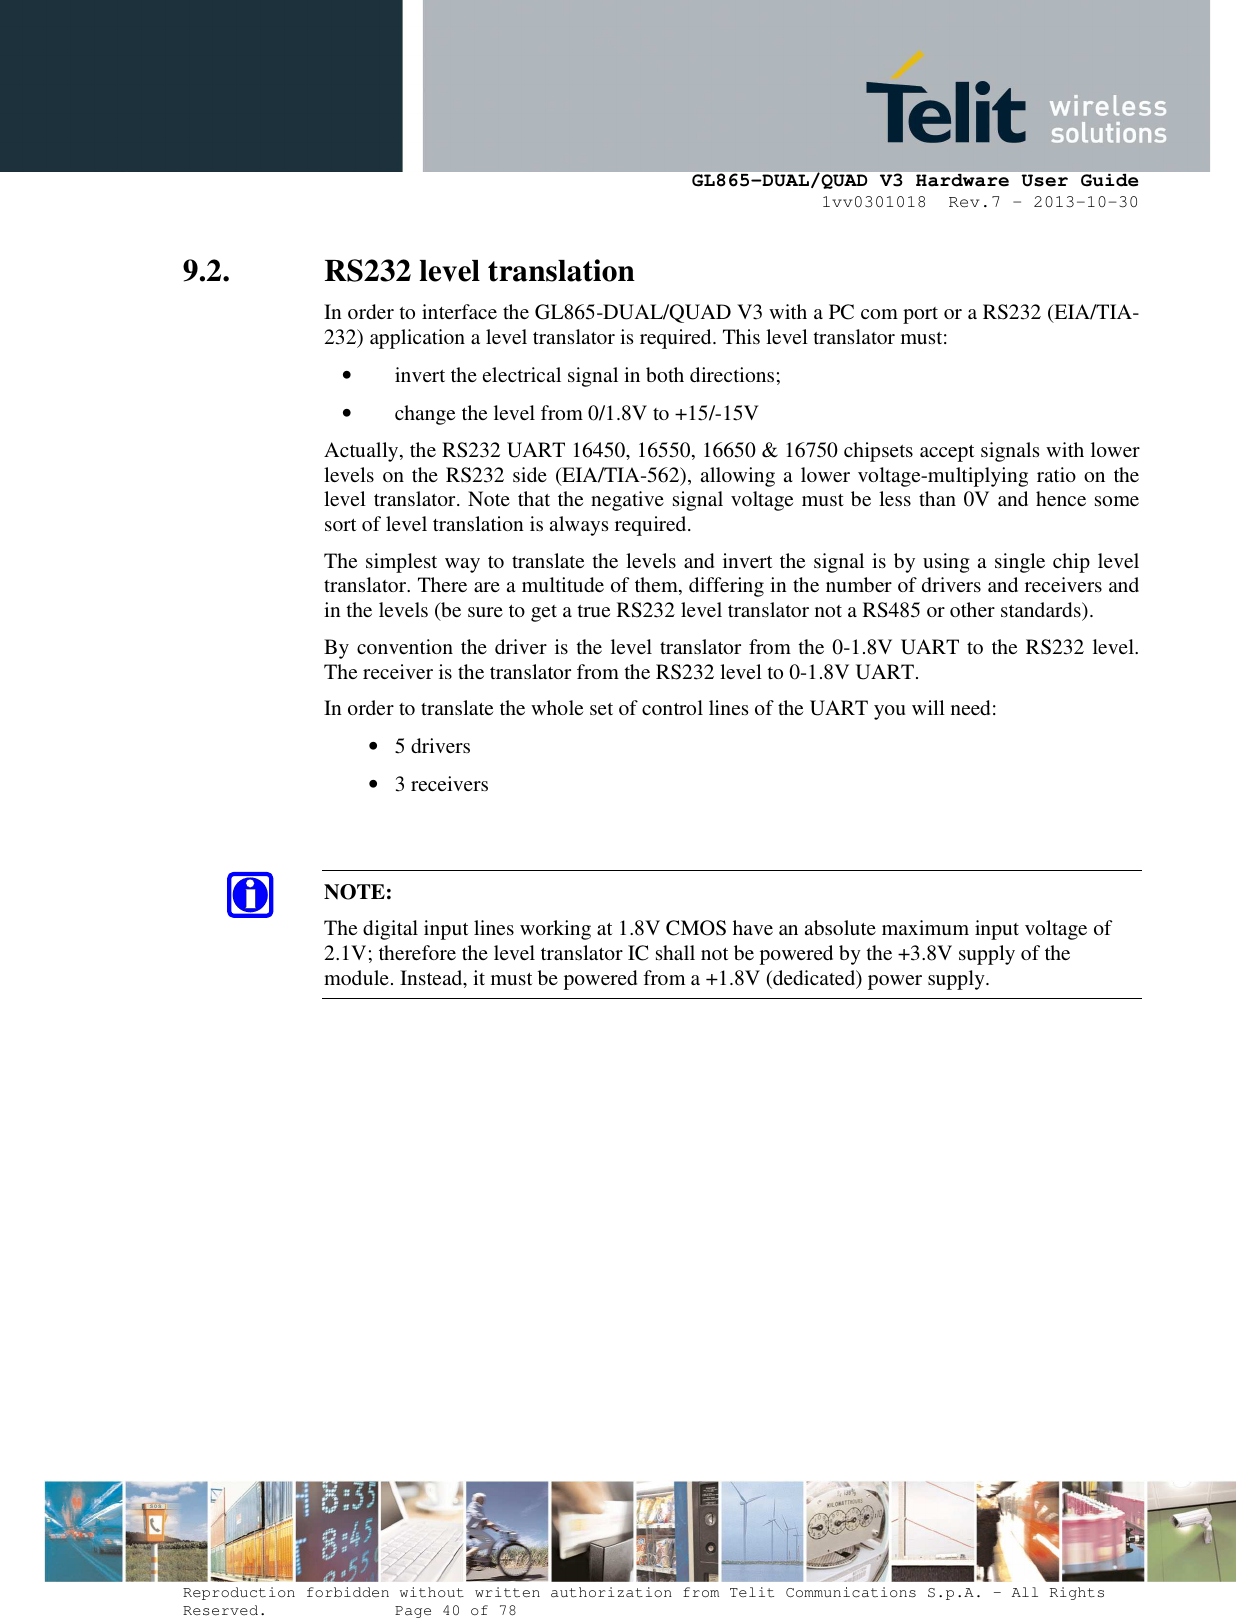      GL865-DUAL/QUAD V3 Hardware User Guide 1vv0301018  Rev.7 – 2013-10-30  Reproduction forbidden without written authorization from Telit Communications S.p.A. - All Rights Reserved.    Page 40 of 78 Mod. 0805 2011-07 Rev.2 9.2. RS232 level translation In order to interface the GL865-DUAL/QUAD V3 with a PC com port or a RS232 (EIA/TIA-232) application a level translator is required. This level translator must: • invert the electrical signal in both directions; • change the level from 0/1.8V to +15/-15V  Actually, the RS232 UART 16450, 16550, 16650 &amp; 16750 chipsets accept signals with lower levels on the RS232 side (EIA/TIA-562), allowing a lower voltage-multiplying ratio on the level translator. Note that the negative signal voltage must be less than 0V and hence some sort of level translation is always required.  The simplest way to translate the levels and invert the signal is by using a single chip level translator. There are a multitude of them, differing in the number of drivers and receivers and in the levels (be sure to get a true RS232 level translator not a RS485 or other standards). By convention the driver is the level translator from the 0-1.8V UART to the RS232 level. The receiver is the translator from the RS232 level to 0-1.8V UART. In order to translate the whole set of control lines of the UART you will need: • 5 drivers • 3 receivers   NOTE: The digital input lines working at 1.8V CMOS have an absolute maximum input voltage of 2.1V; therefore the level translator IC shall not be powered by the +3.8V supply of the module. Instead, it must be powered from a +1.8V (dedicated) power supply.    